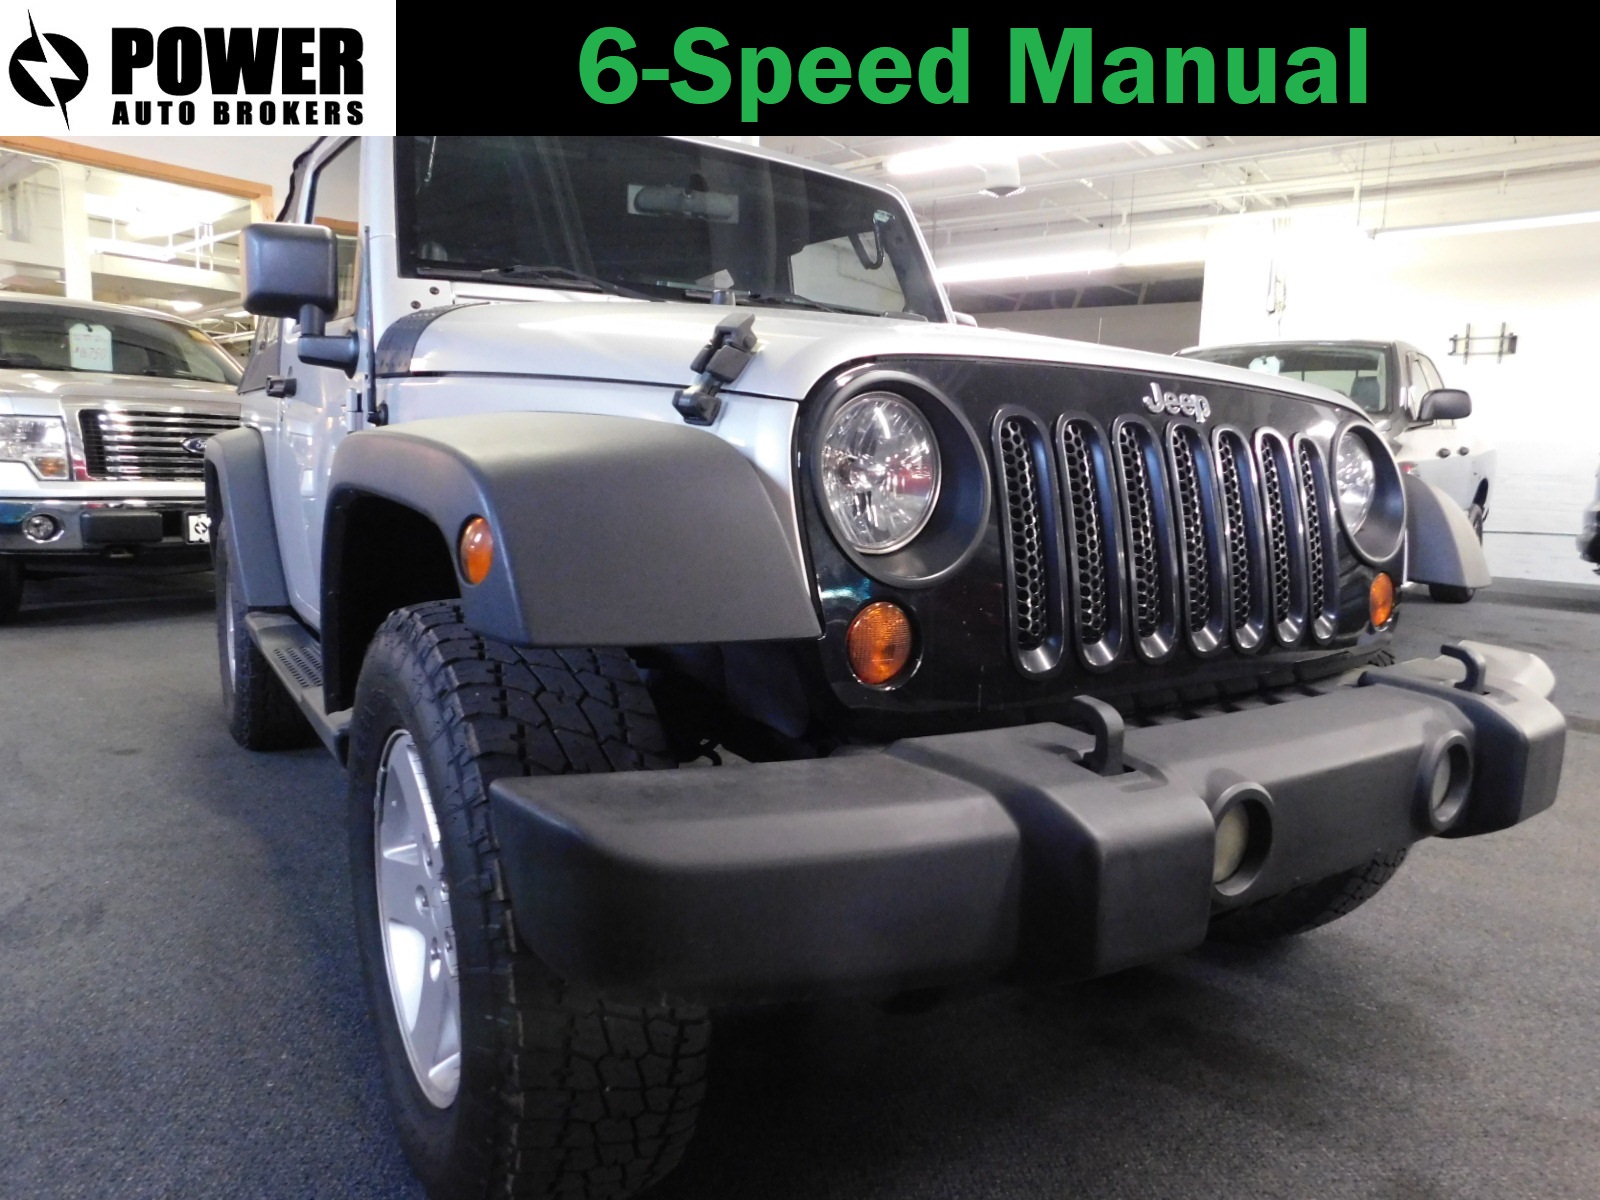 Used 2009 Jeep Wrangler for Sale in Cleveland, OH (Test Drive at Home) - Kelley  Blue Book